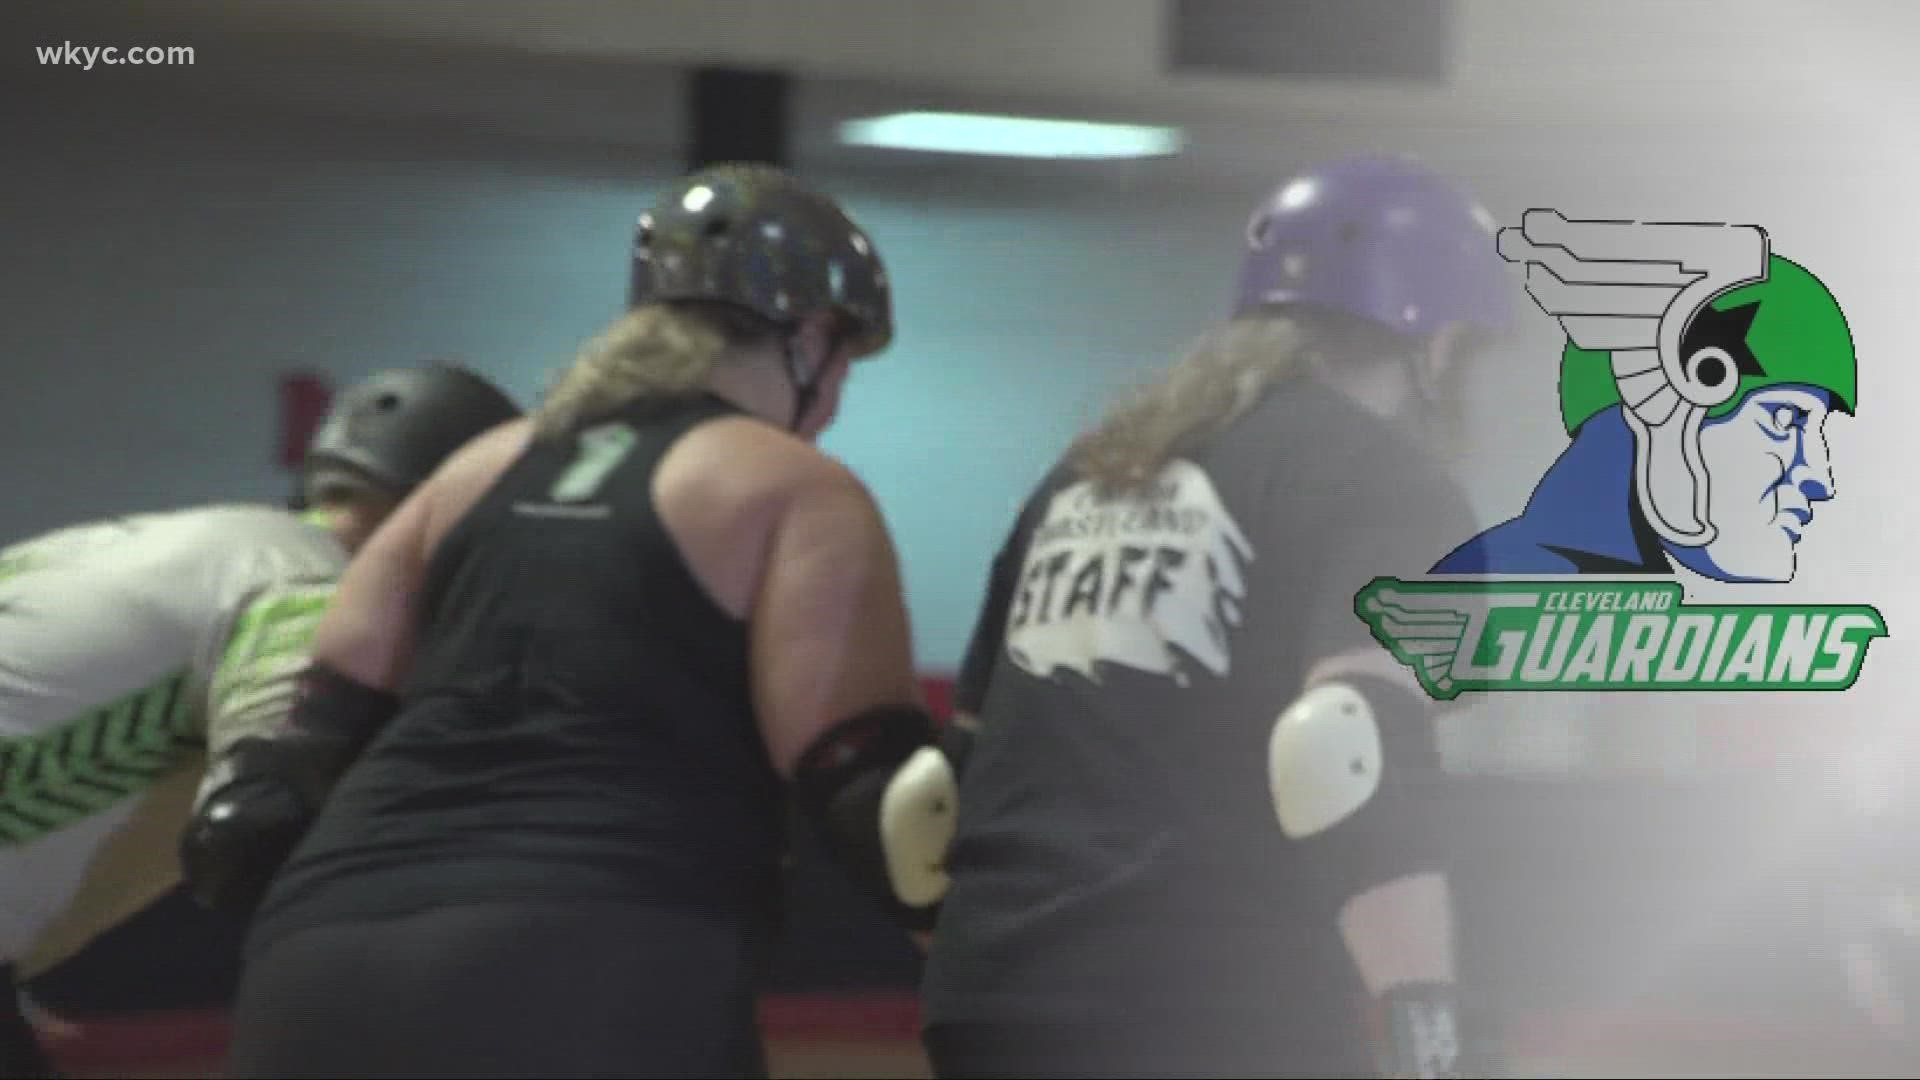 With its lawsuit against the city’s baseball team settled, the Guardians roller derby team tries to get back on track.